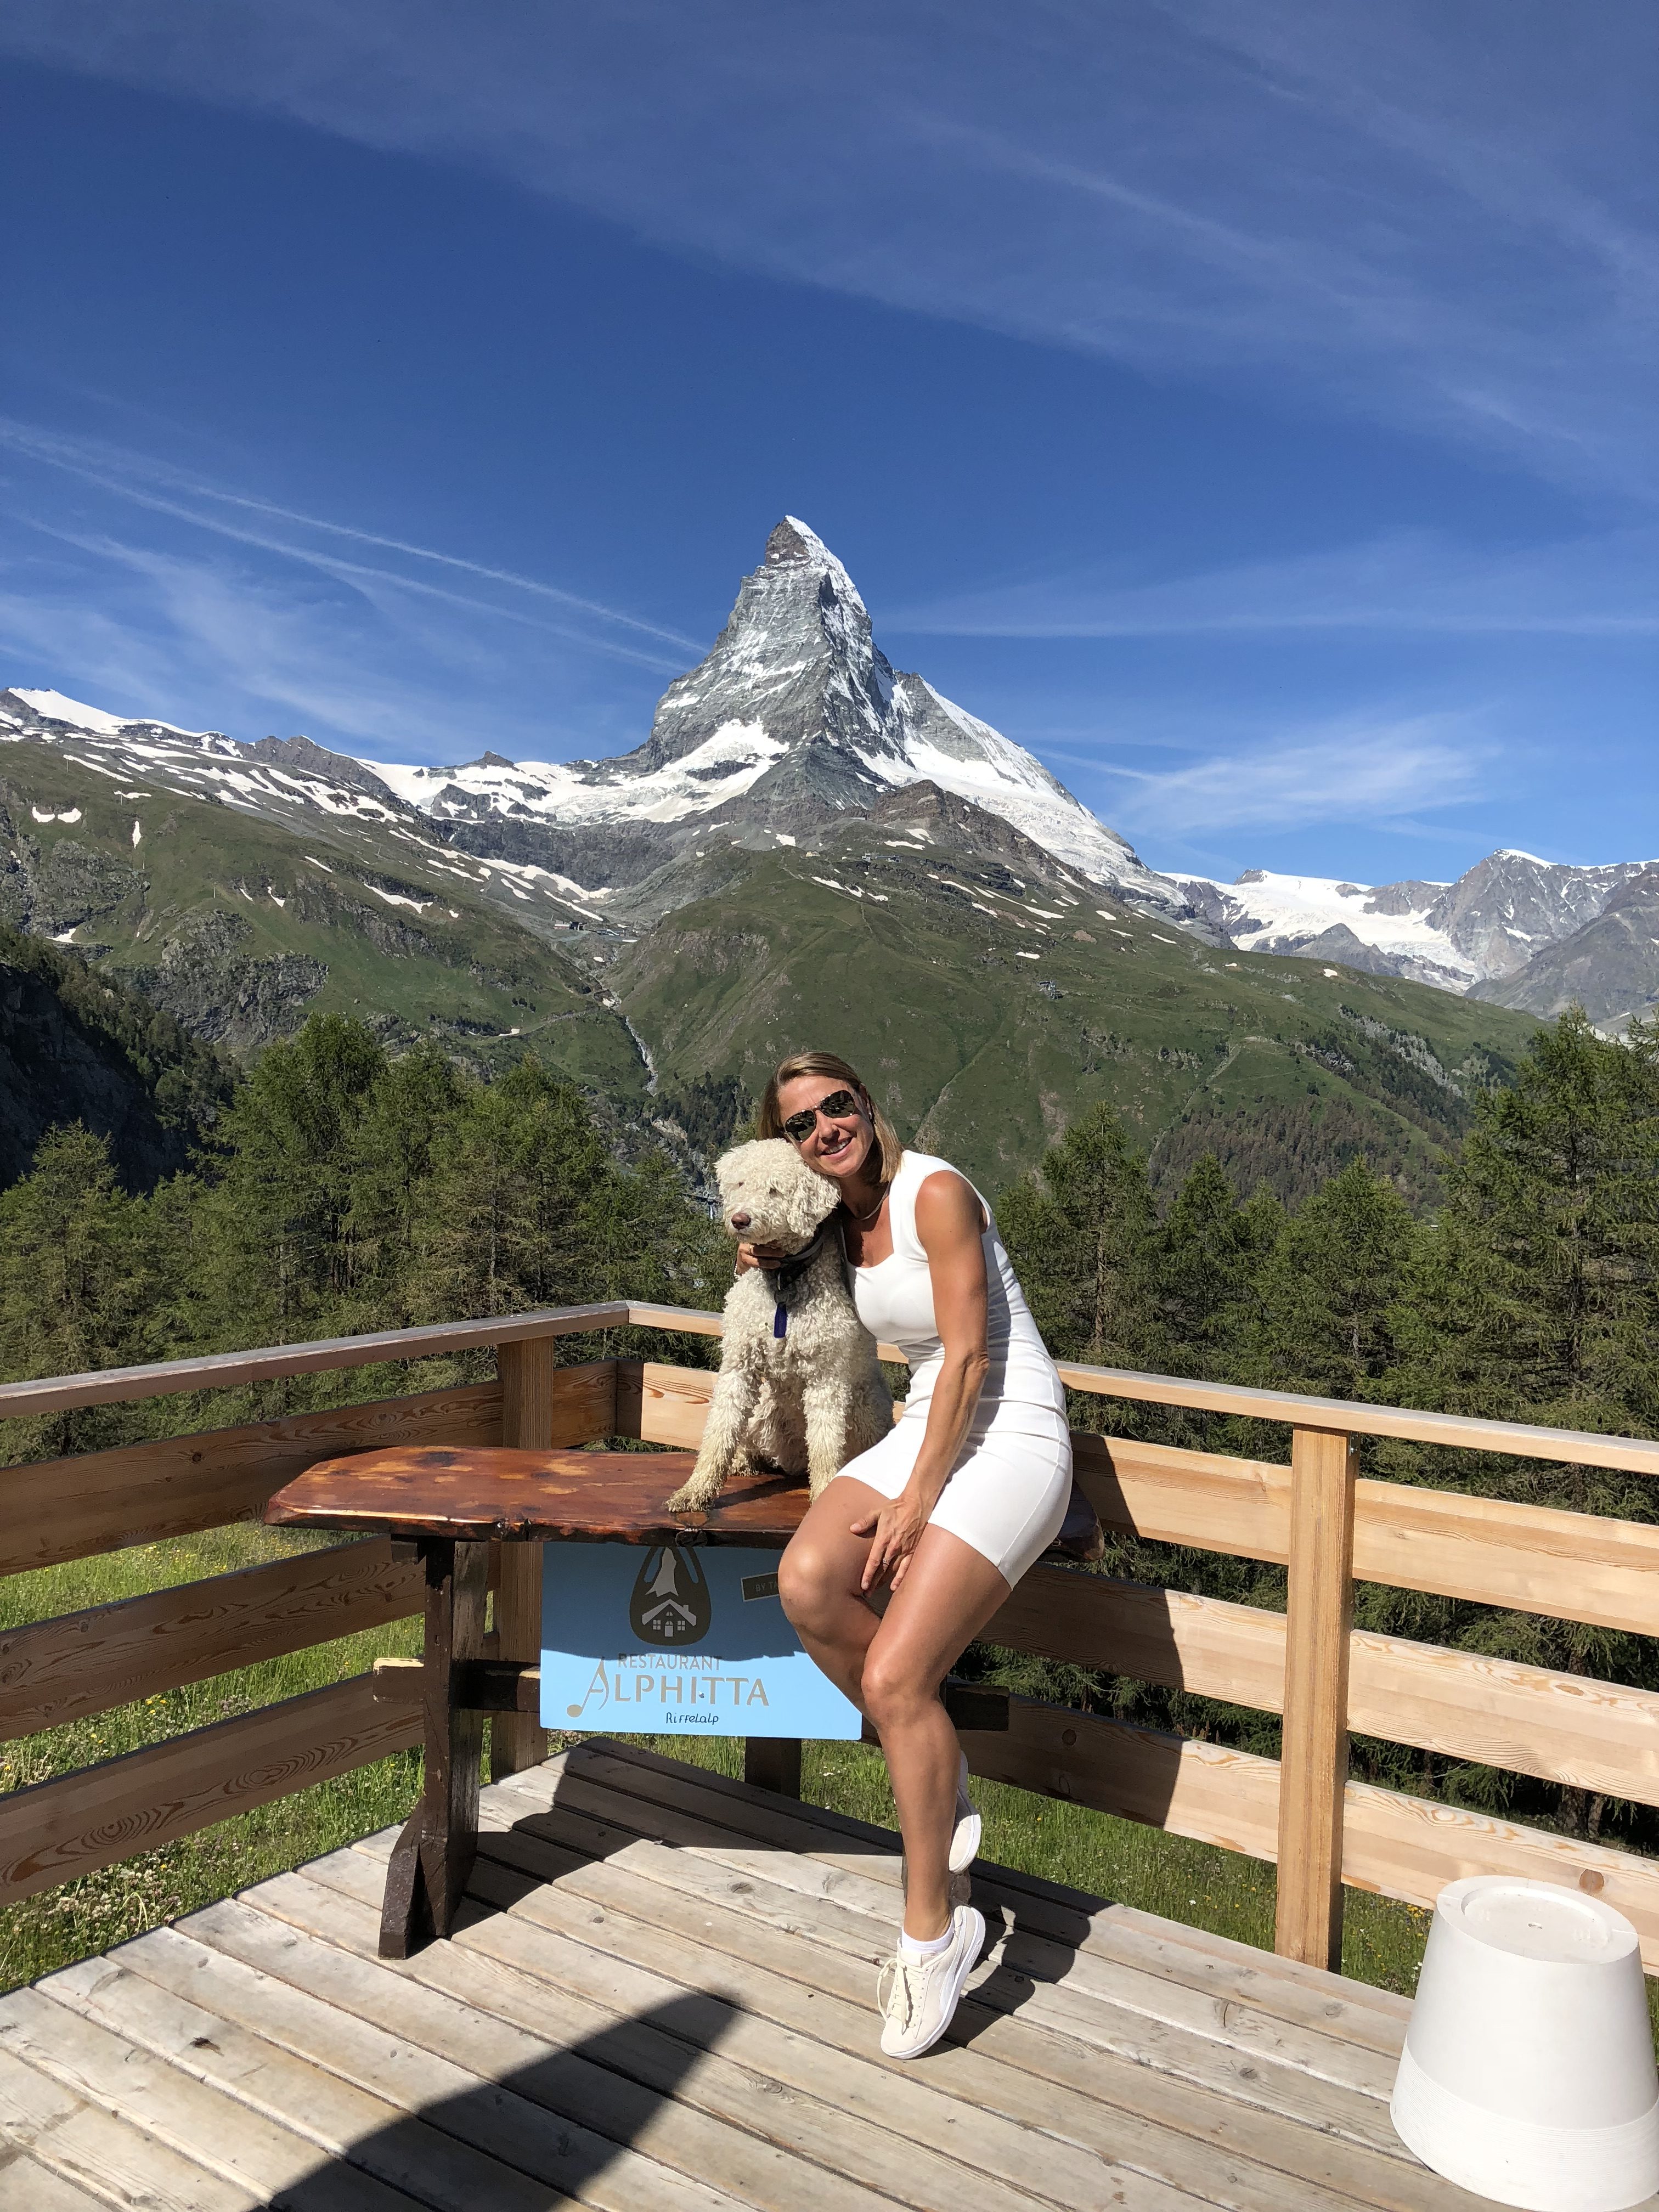 Tanja together with her dog, Marley on the terrace and in the background the Matterhorn